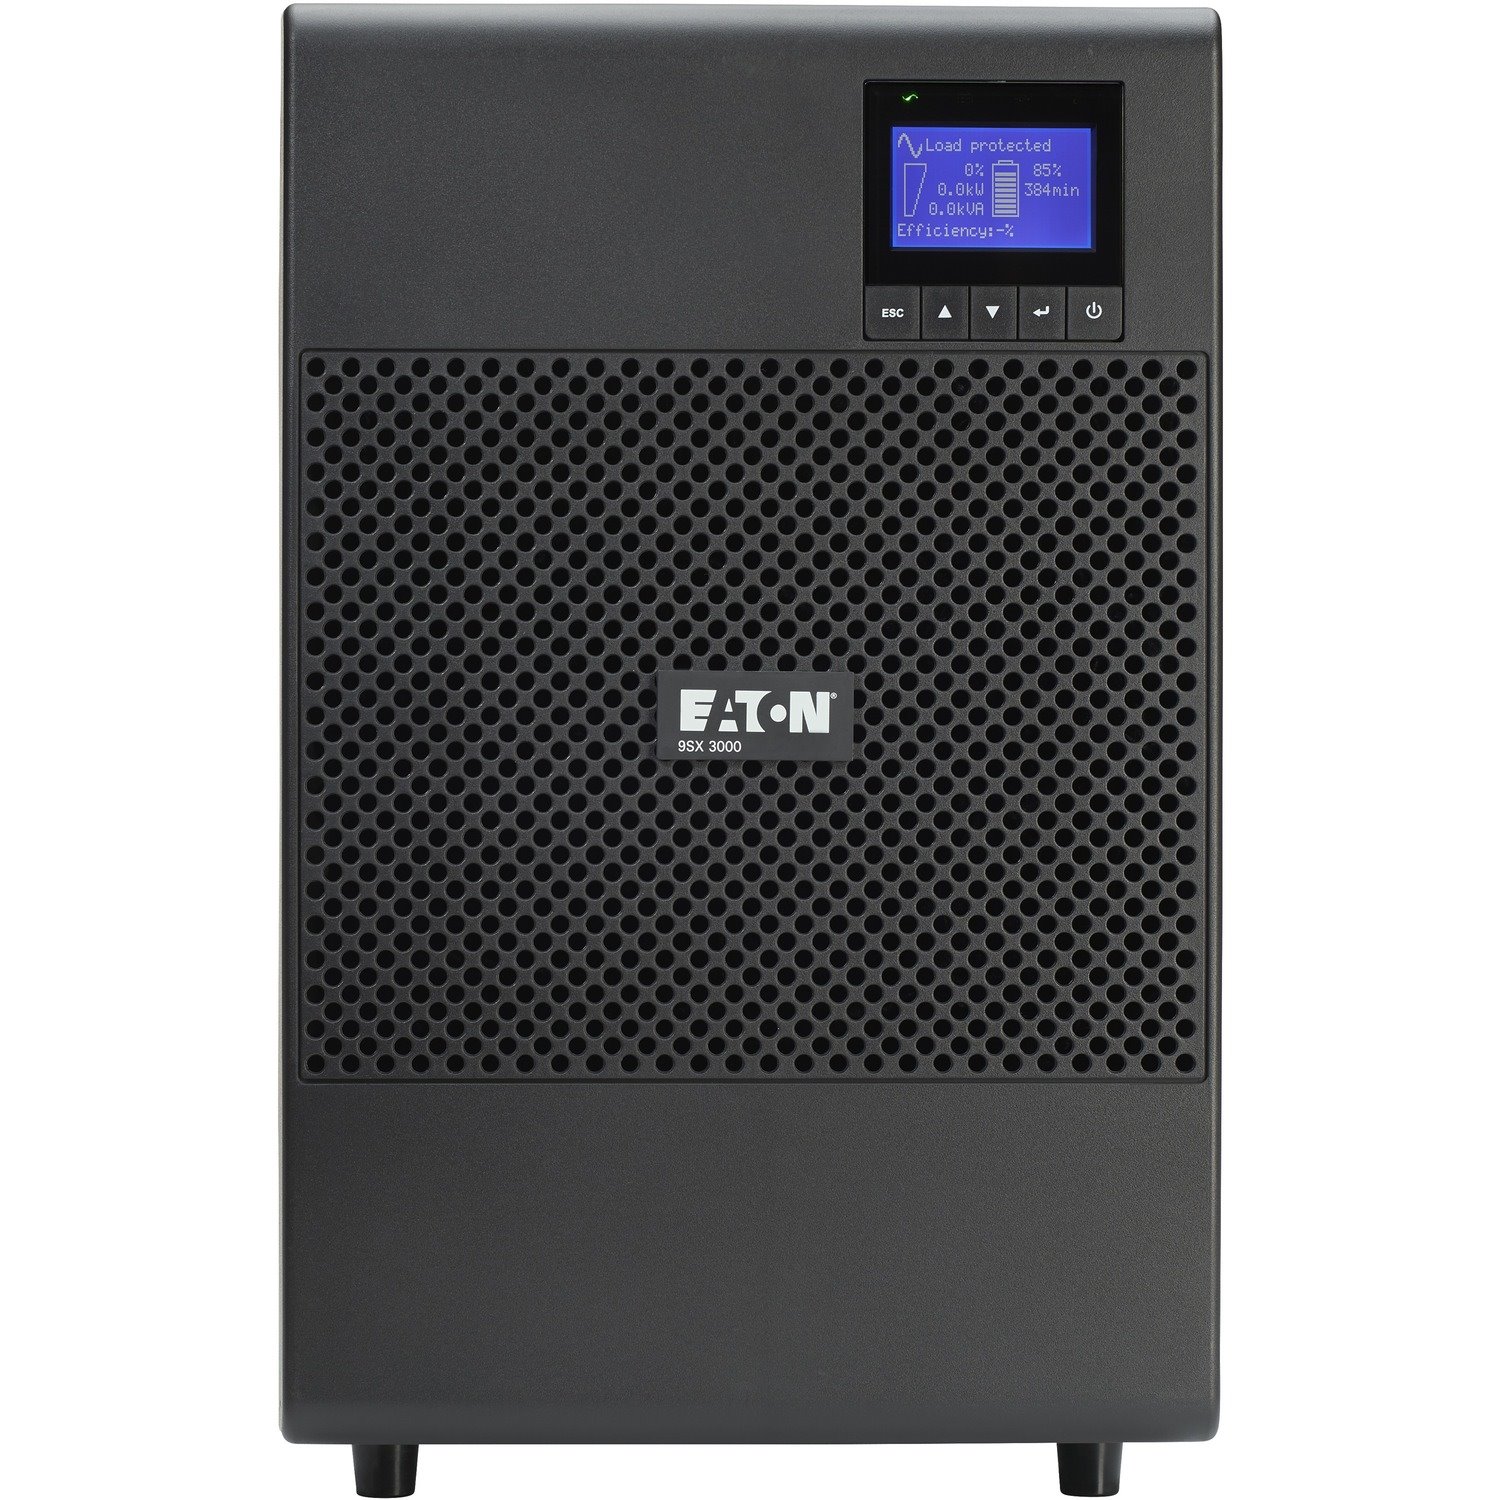 Eaton 9SX 3000VA 2700W 120V Online Double-Conversion UPS - Hardwired In/Out, Cybersecure Network Card Option, Extended Run, Tower - Battery Backup